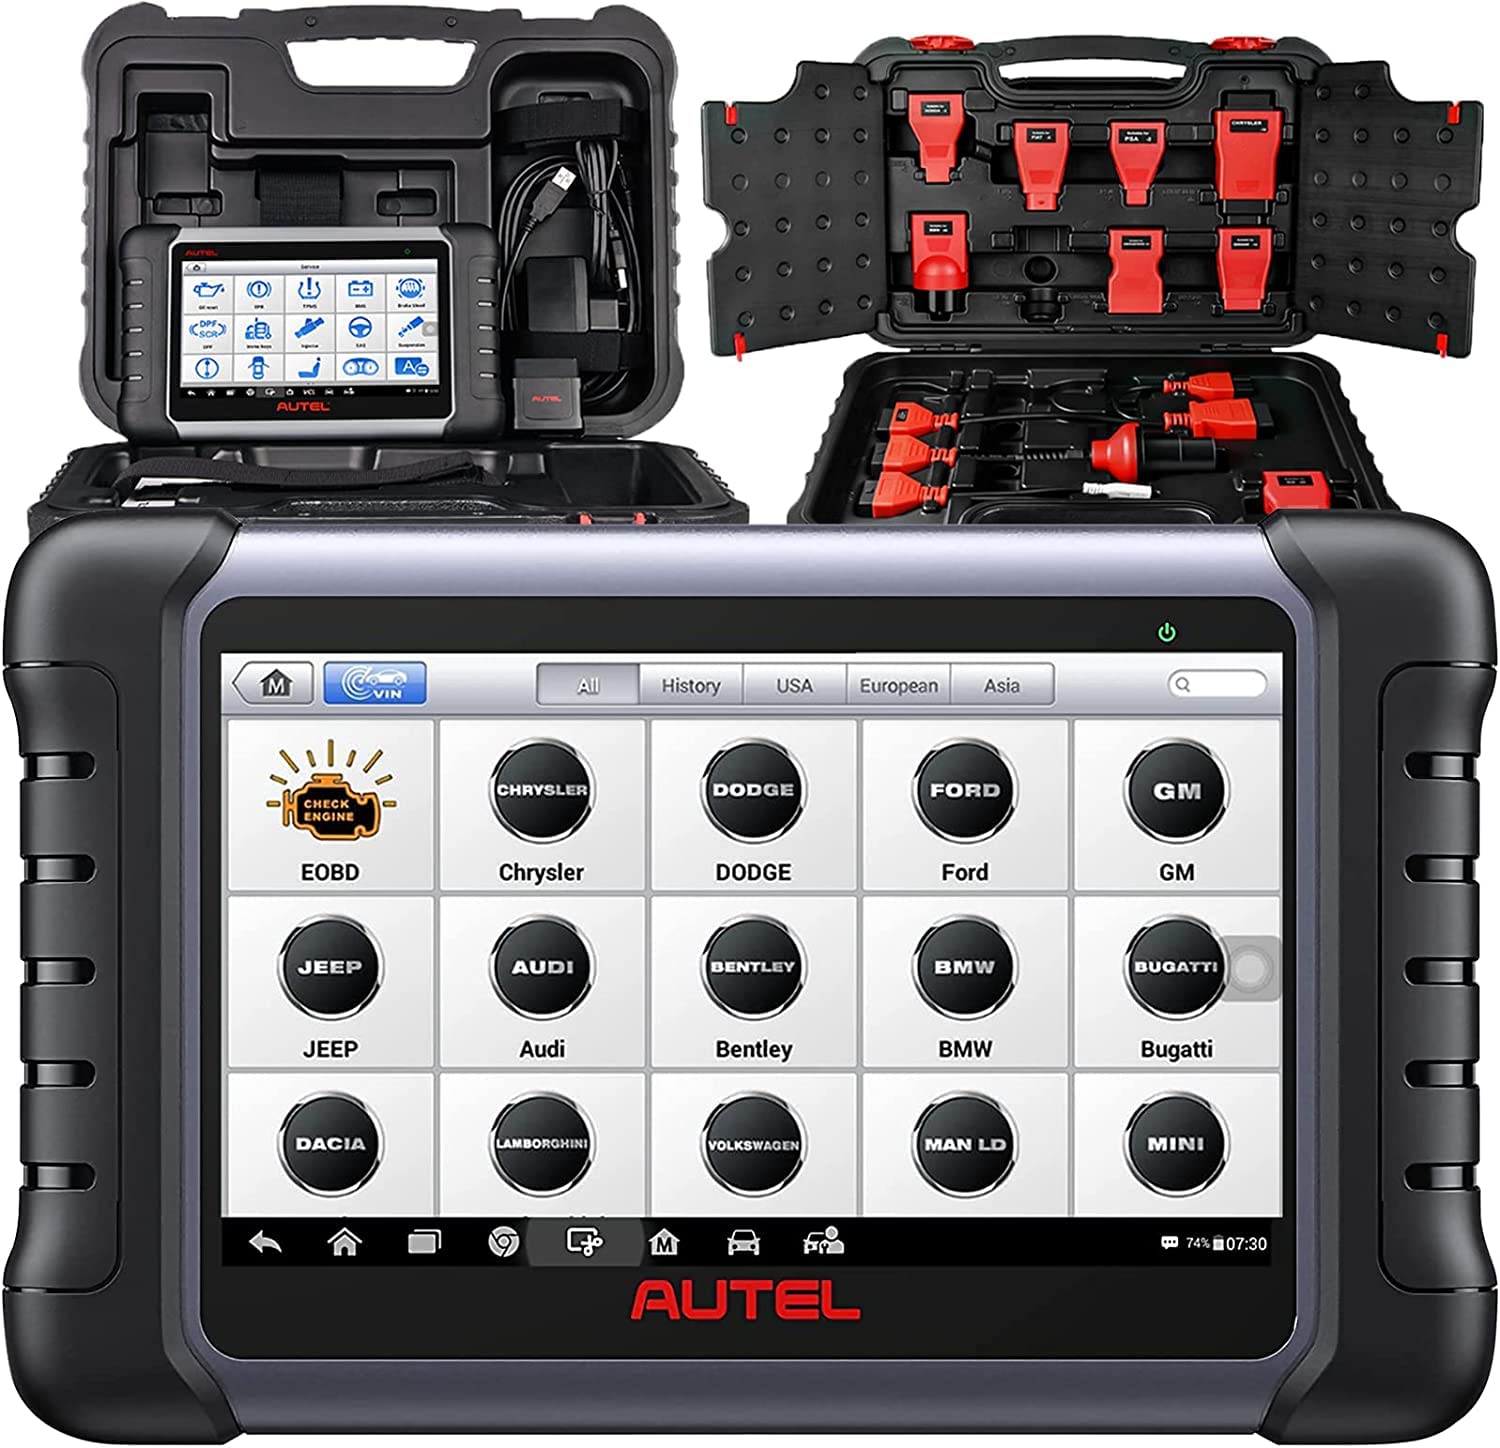 Autel MaxiDAS DS808K Diagnostic Tool, Upgrade of DS708 MP808, Same As MS906, Bi-Directional Control,ABS Bleed, Injector Coding, Active Test, Oil Reset, EPB, SRS, SAS, DPF